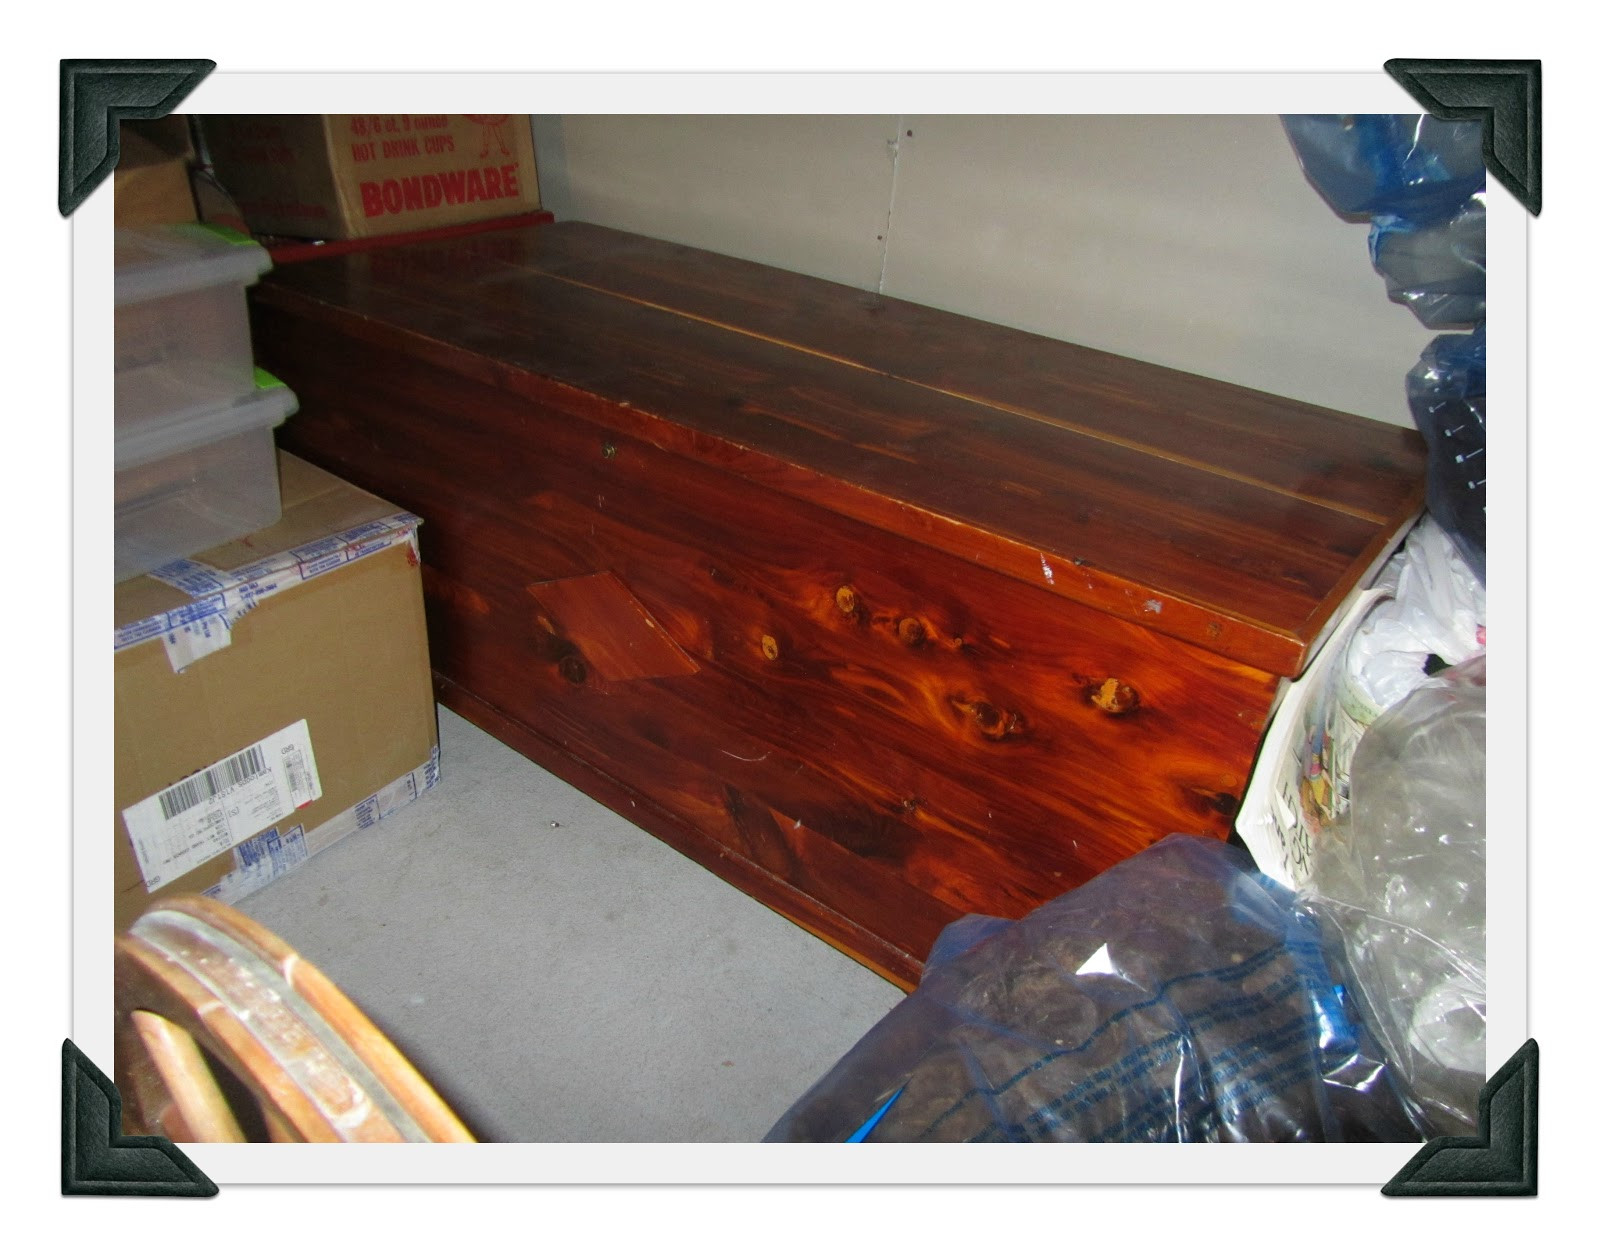 26 Elegant Amazon Hardwood Flooring Markham 2024 free download amazon hardwood flooring markham of north of 49 march 2013 with regard to this time i knew exactly where to look that didnt necessarily make things easy since the item was located in the ver